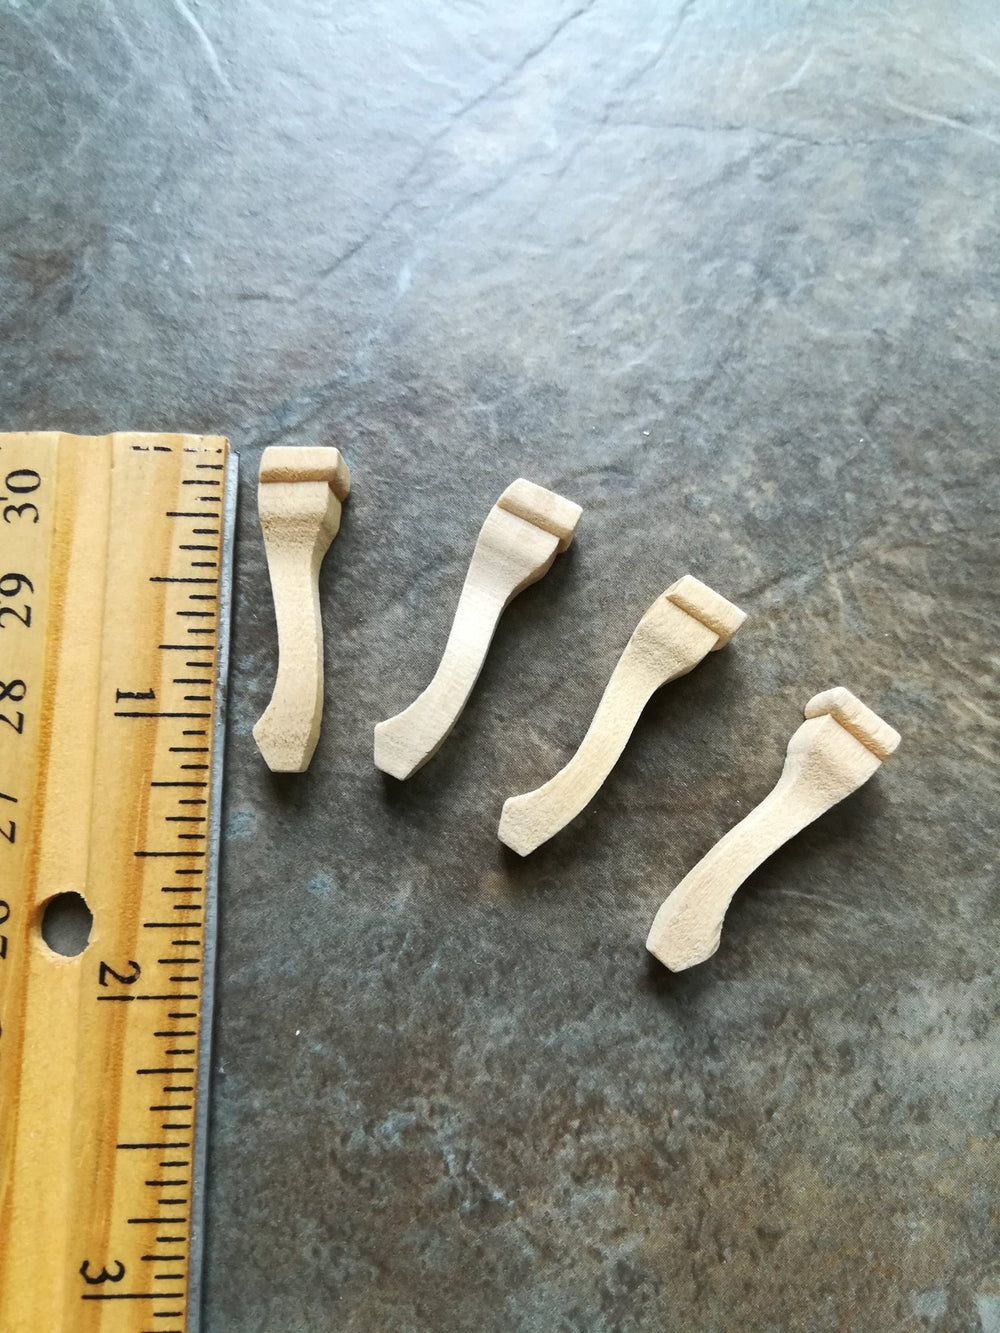 Dollhouse Miniature Wood Cabriole Legs for Chair or Furniture Set of 4 Pieces 1:12 Scale 3/8" - Miniature Crush